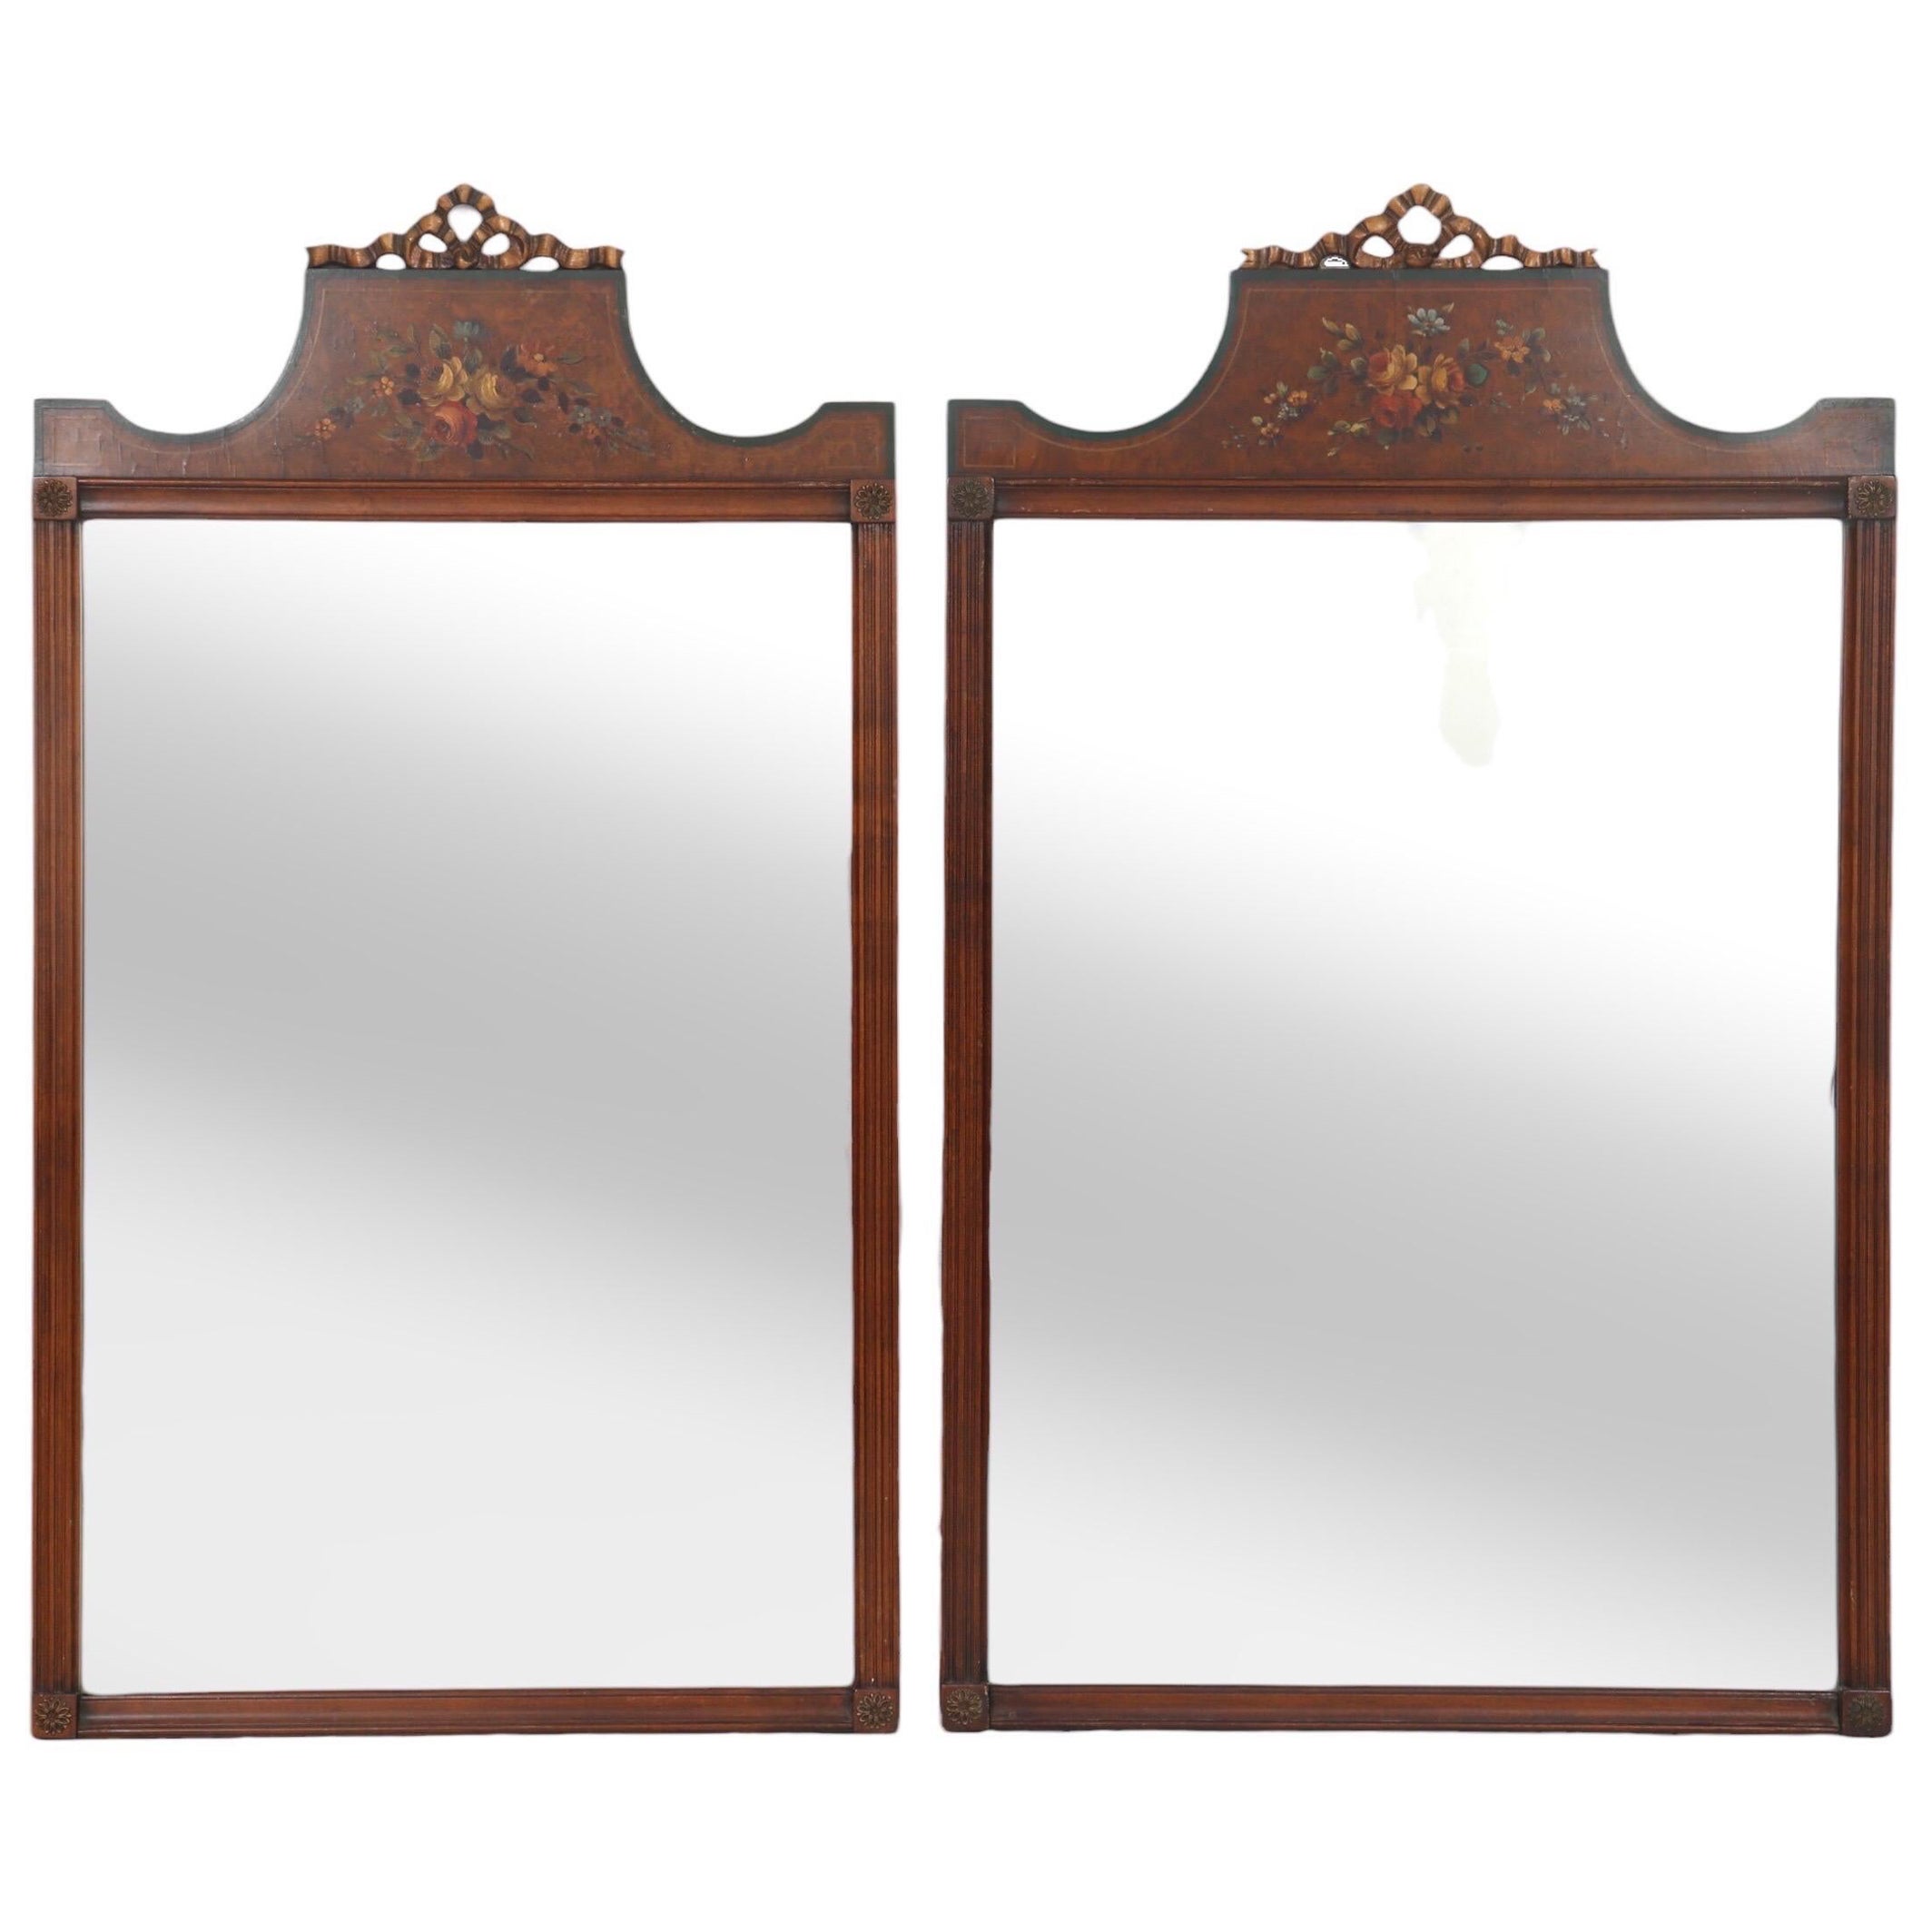 Adam Style Wall Mirrors - a Near Pair For Sale